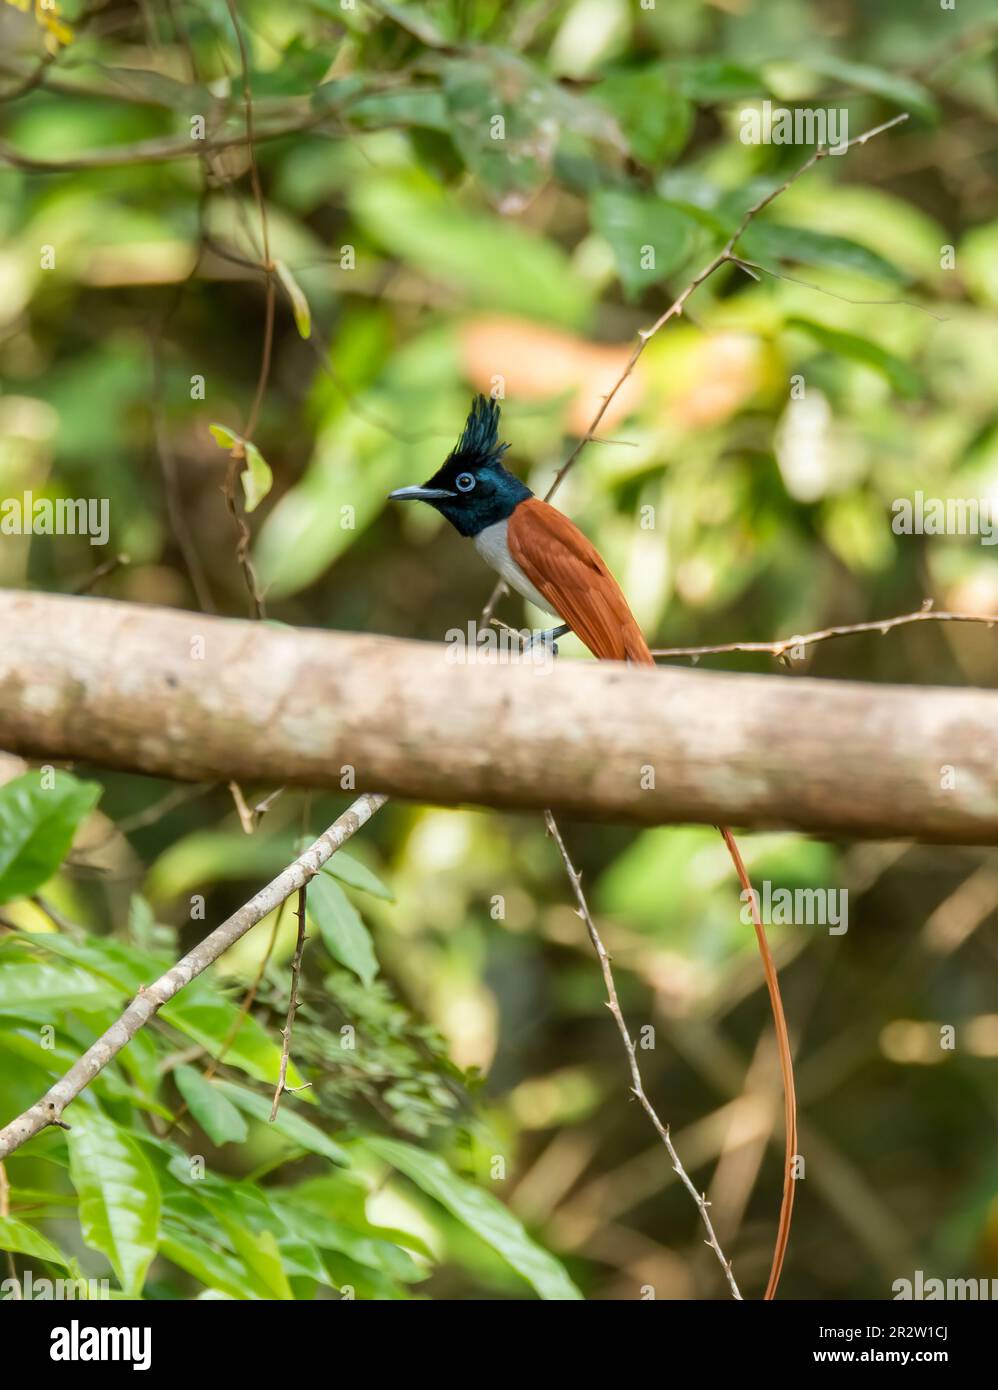 An Asian paradise flycatcher female bird is perched on a tree branch on the outskirts of Thattekad, Kerala Stock Photo